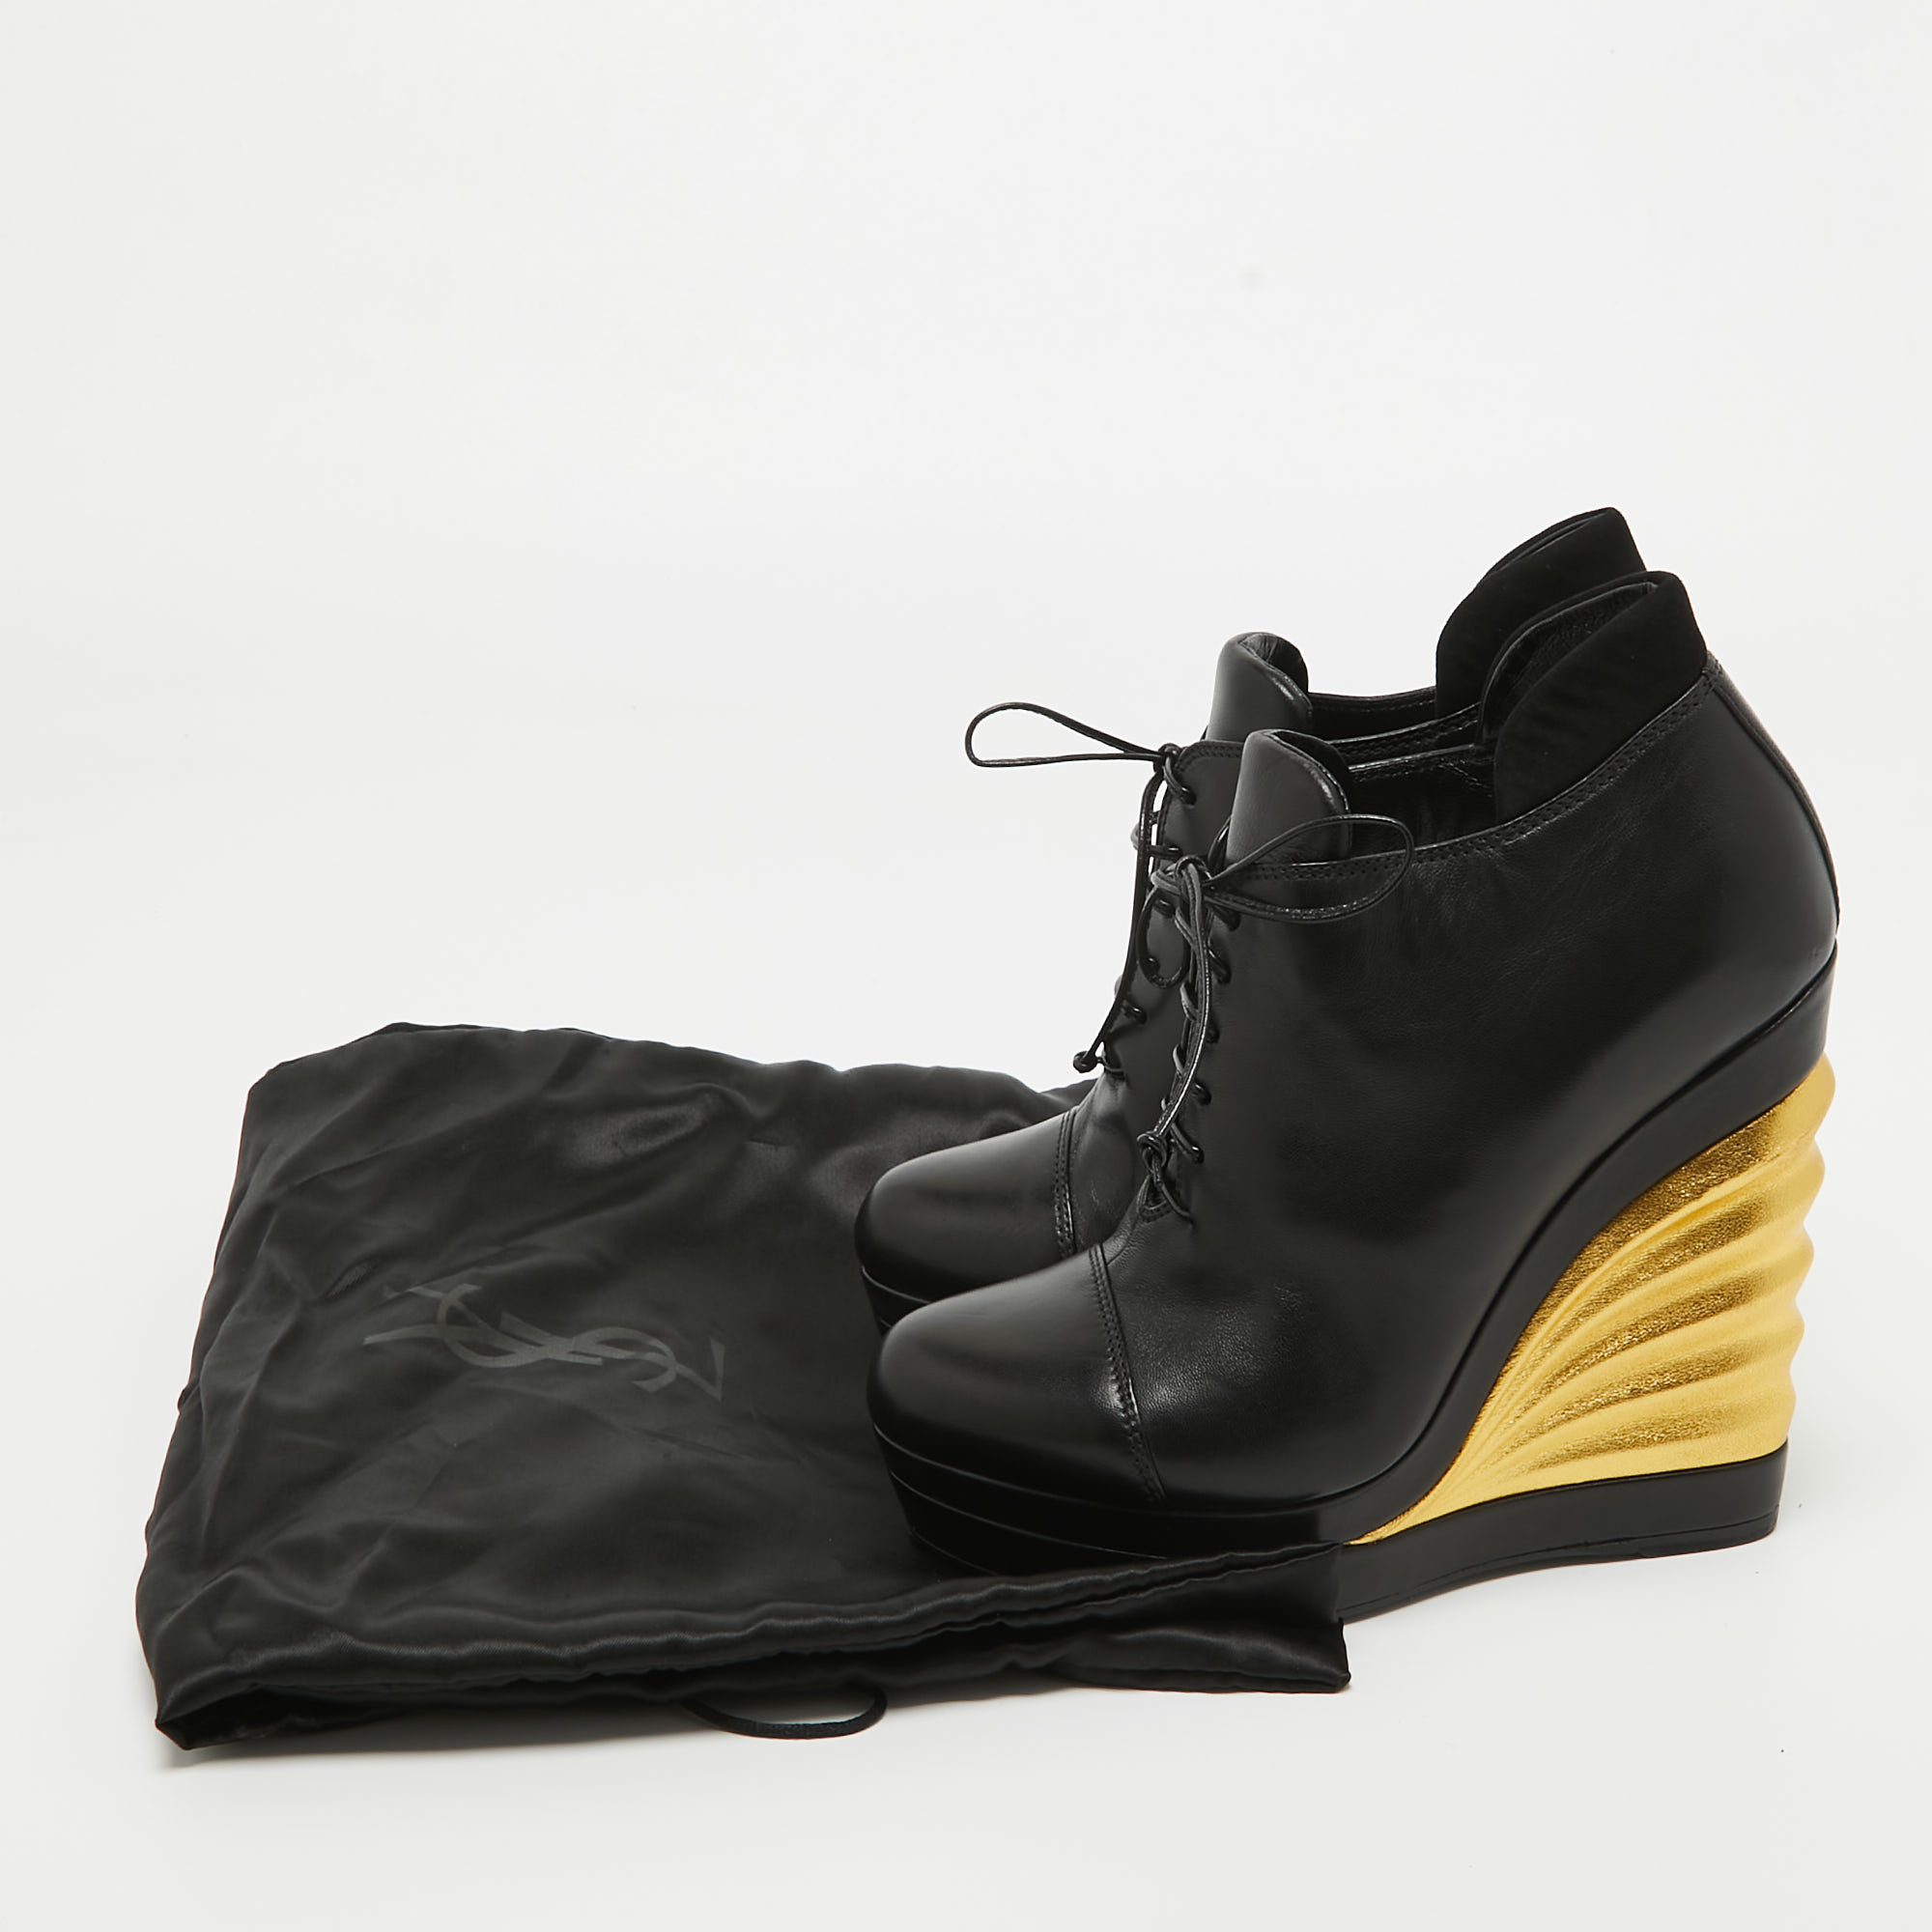 Saint Laurent Black Leather Robyn Wedge Booties Size 36